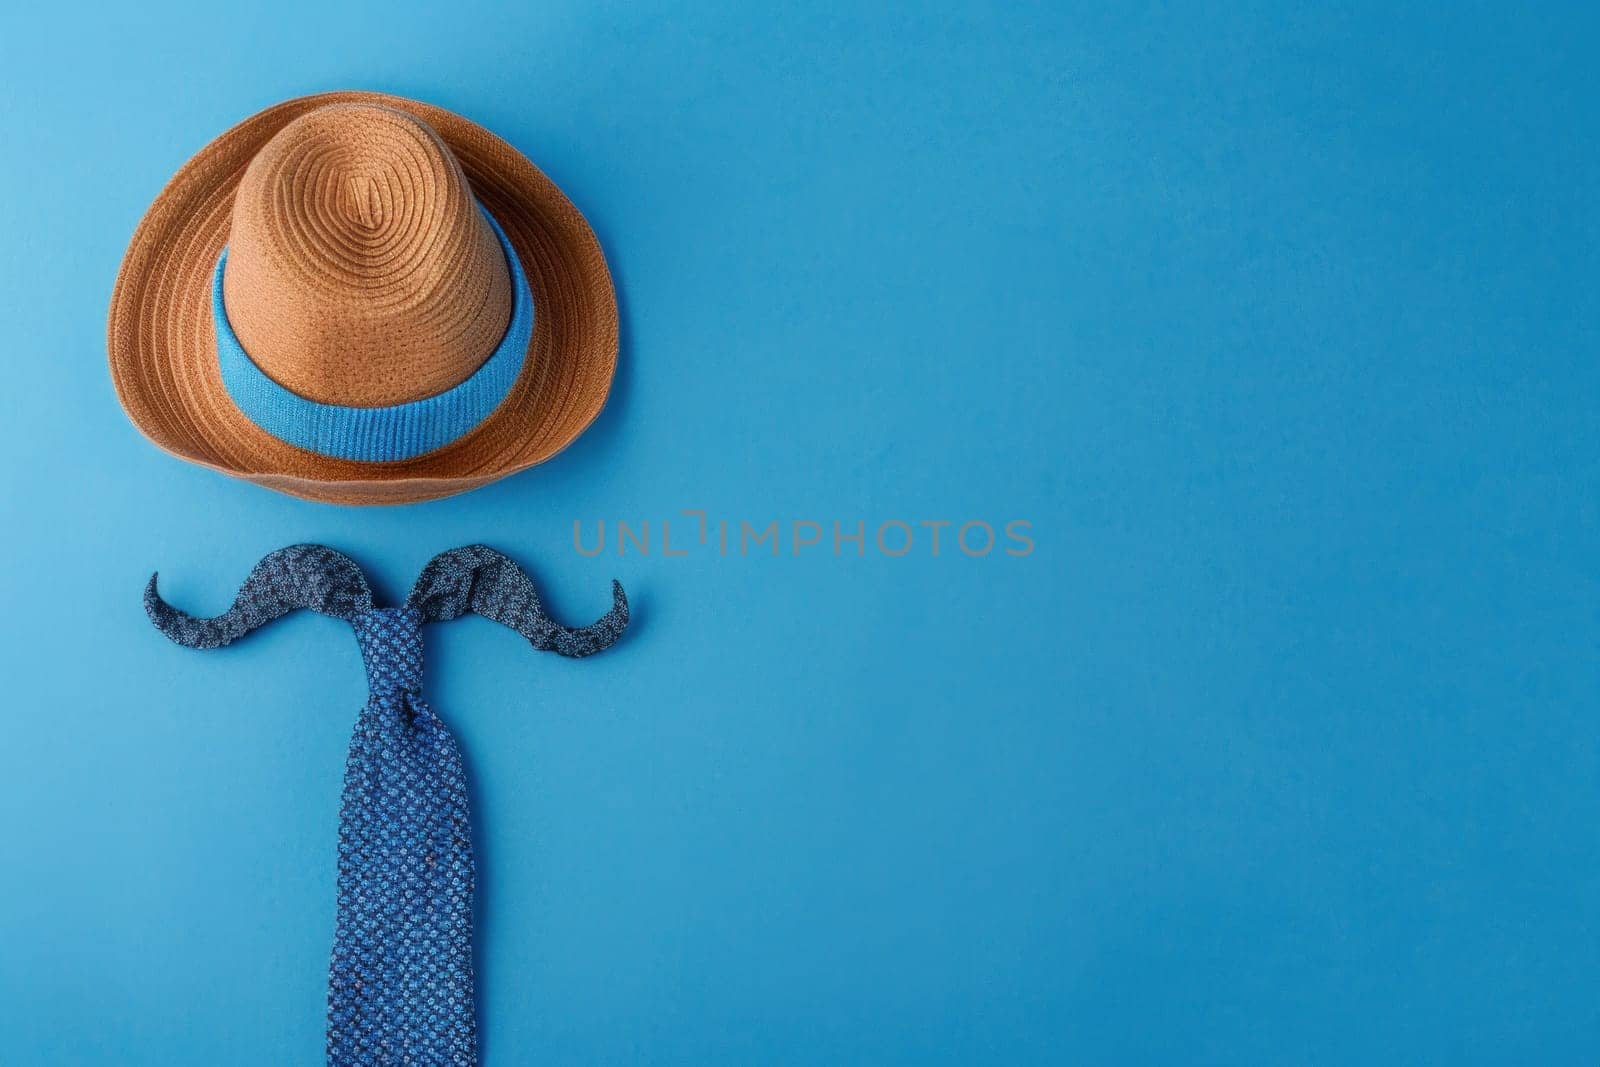 Fashionable gentlemen's accessories on a stylish blue background with copy space for text